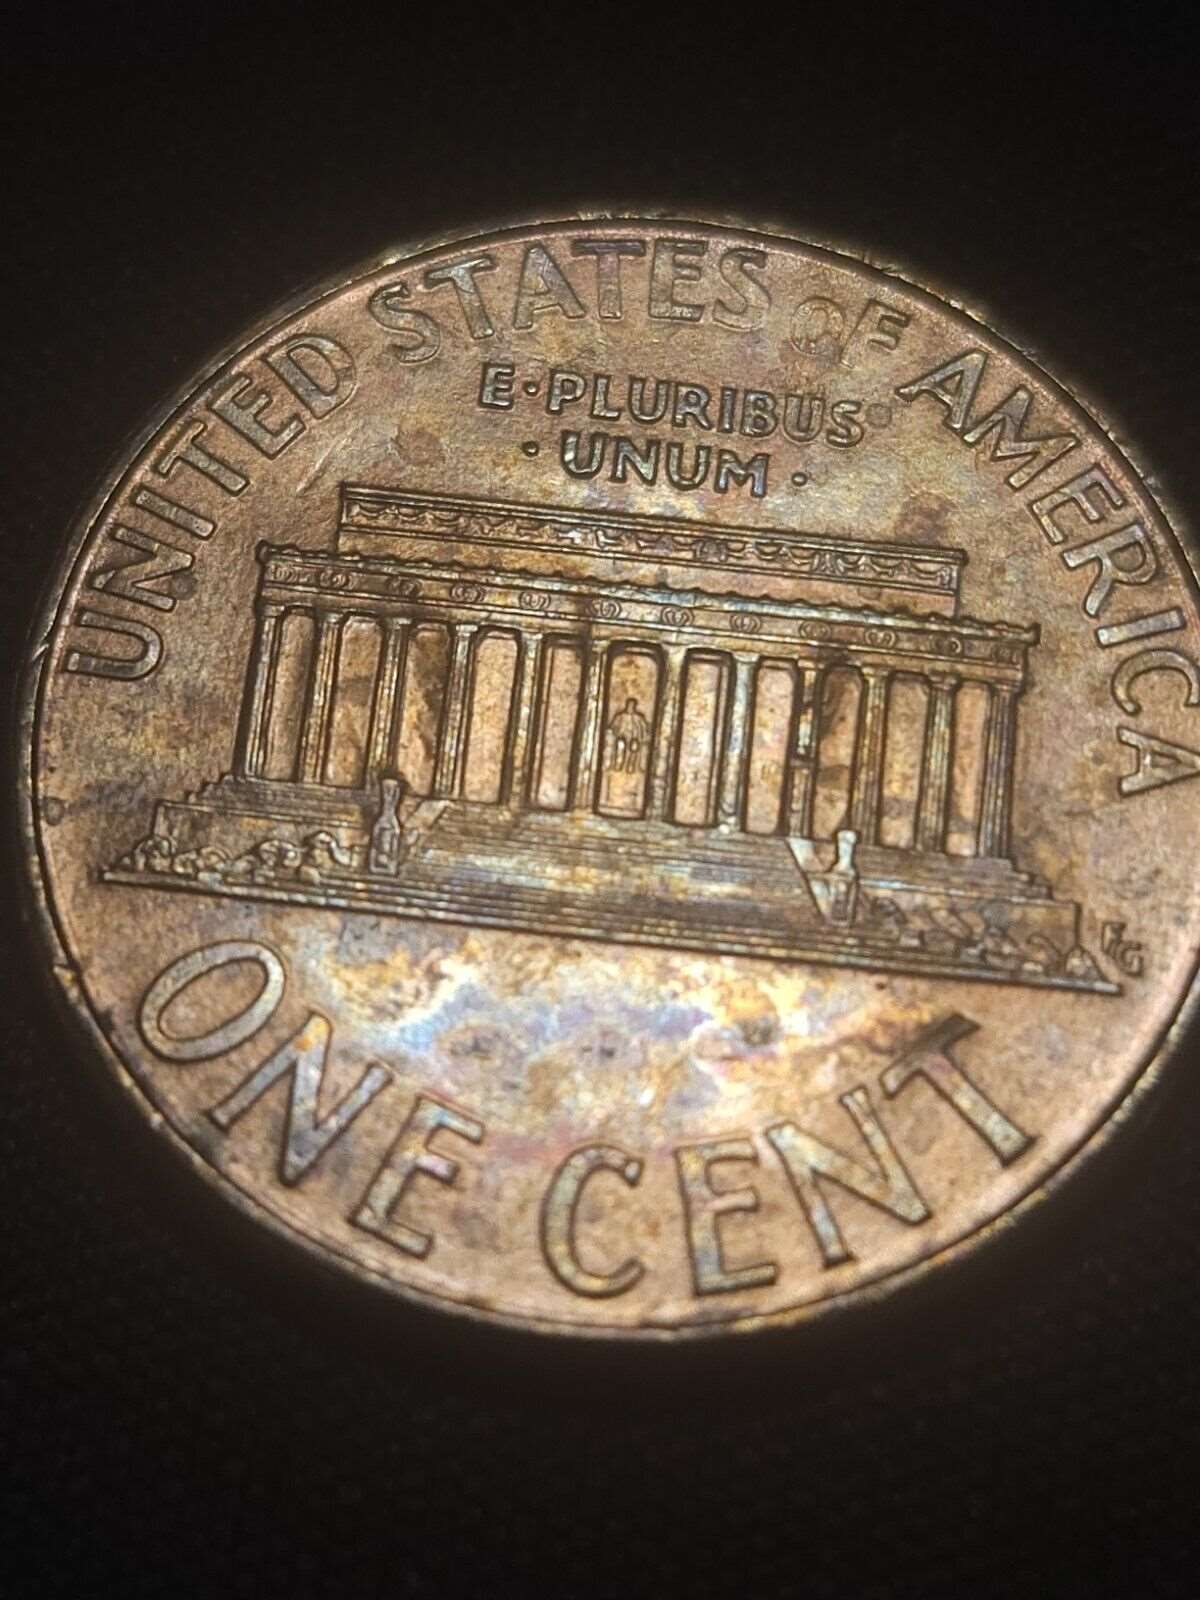 1998 Toned Lincoln Memorial Cent